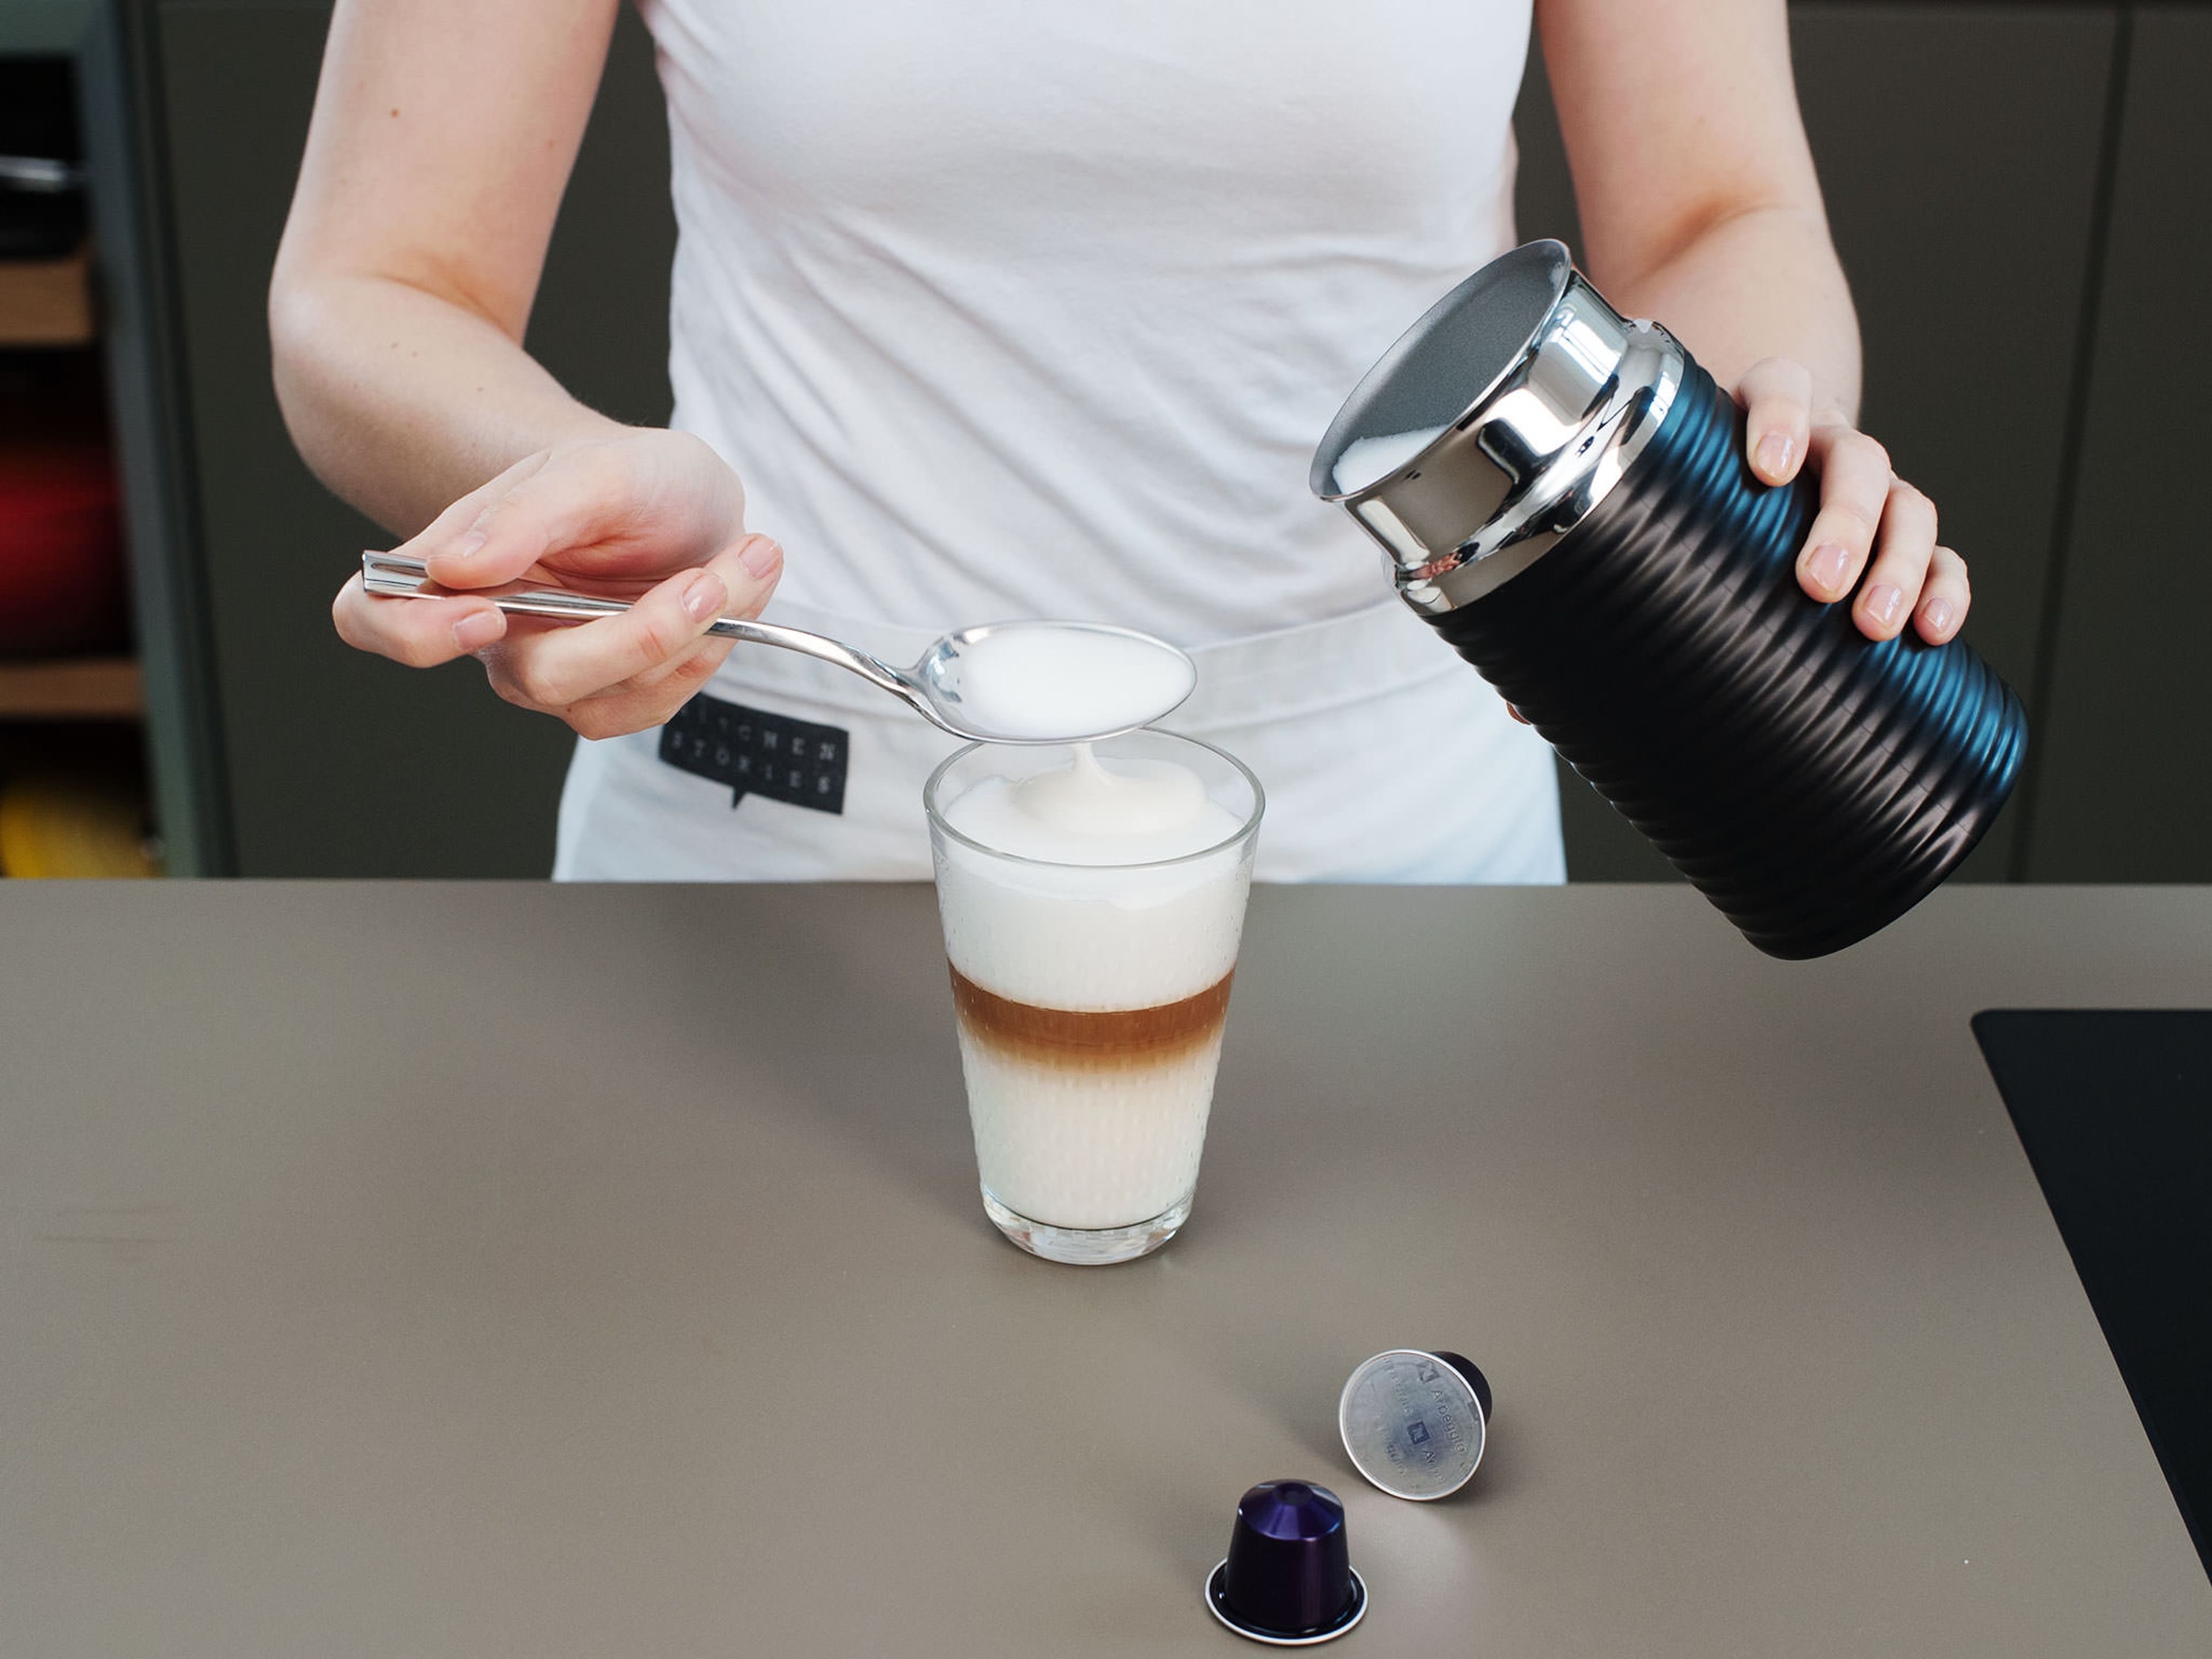 If you like more milk froth, just add some more milk to your Nespresso milk frother and top off your glass. Enjoy!